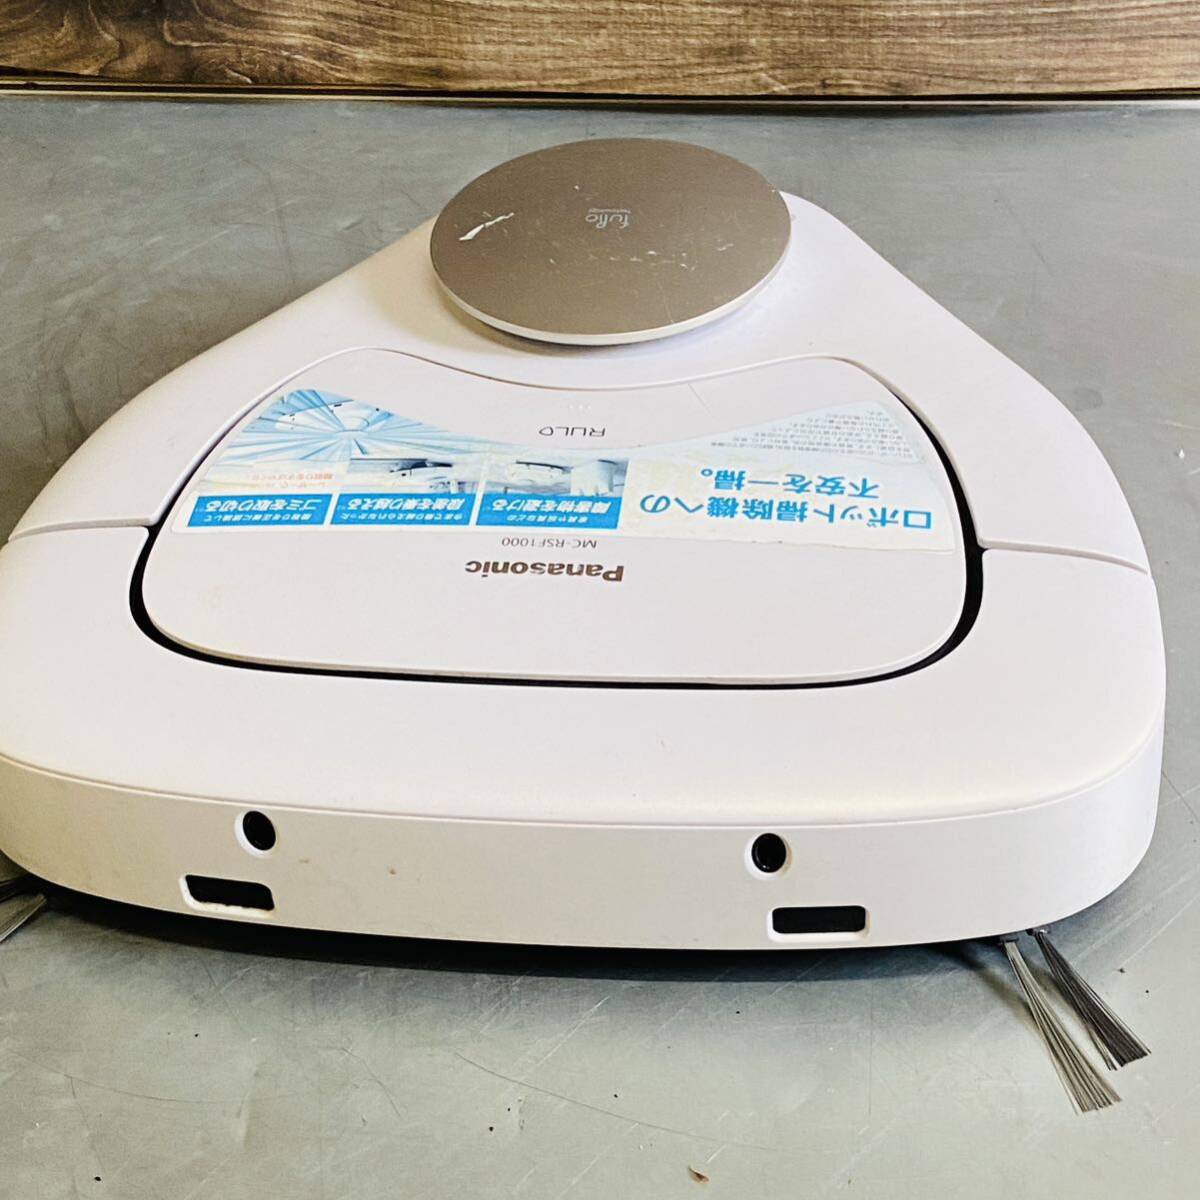 Panasonic RULO Roo ro robot vacuum cleaner MC-RSF1000-W 2020 year made power supply has confirmed body only 